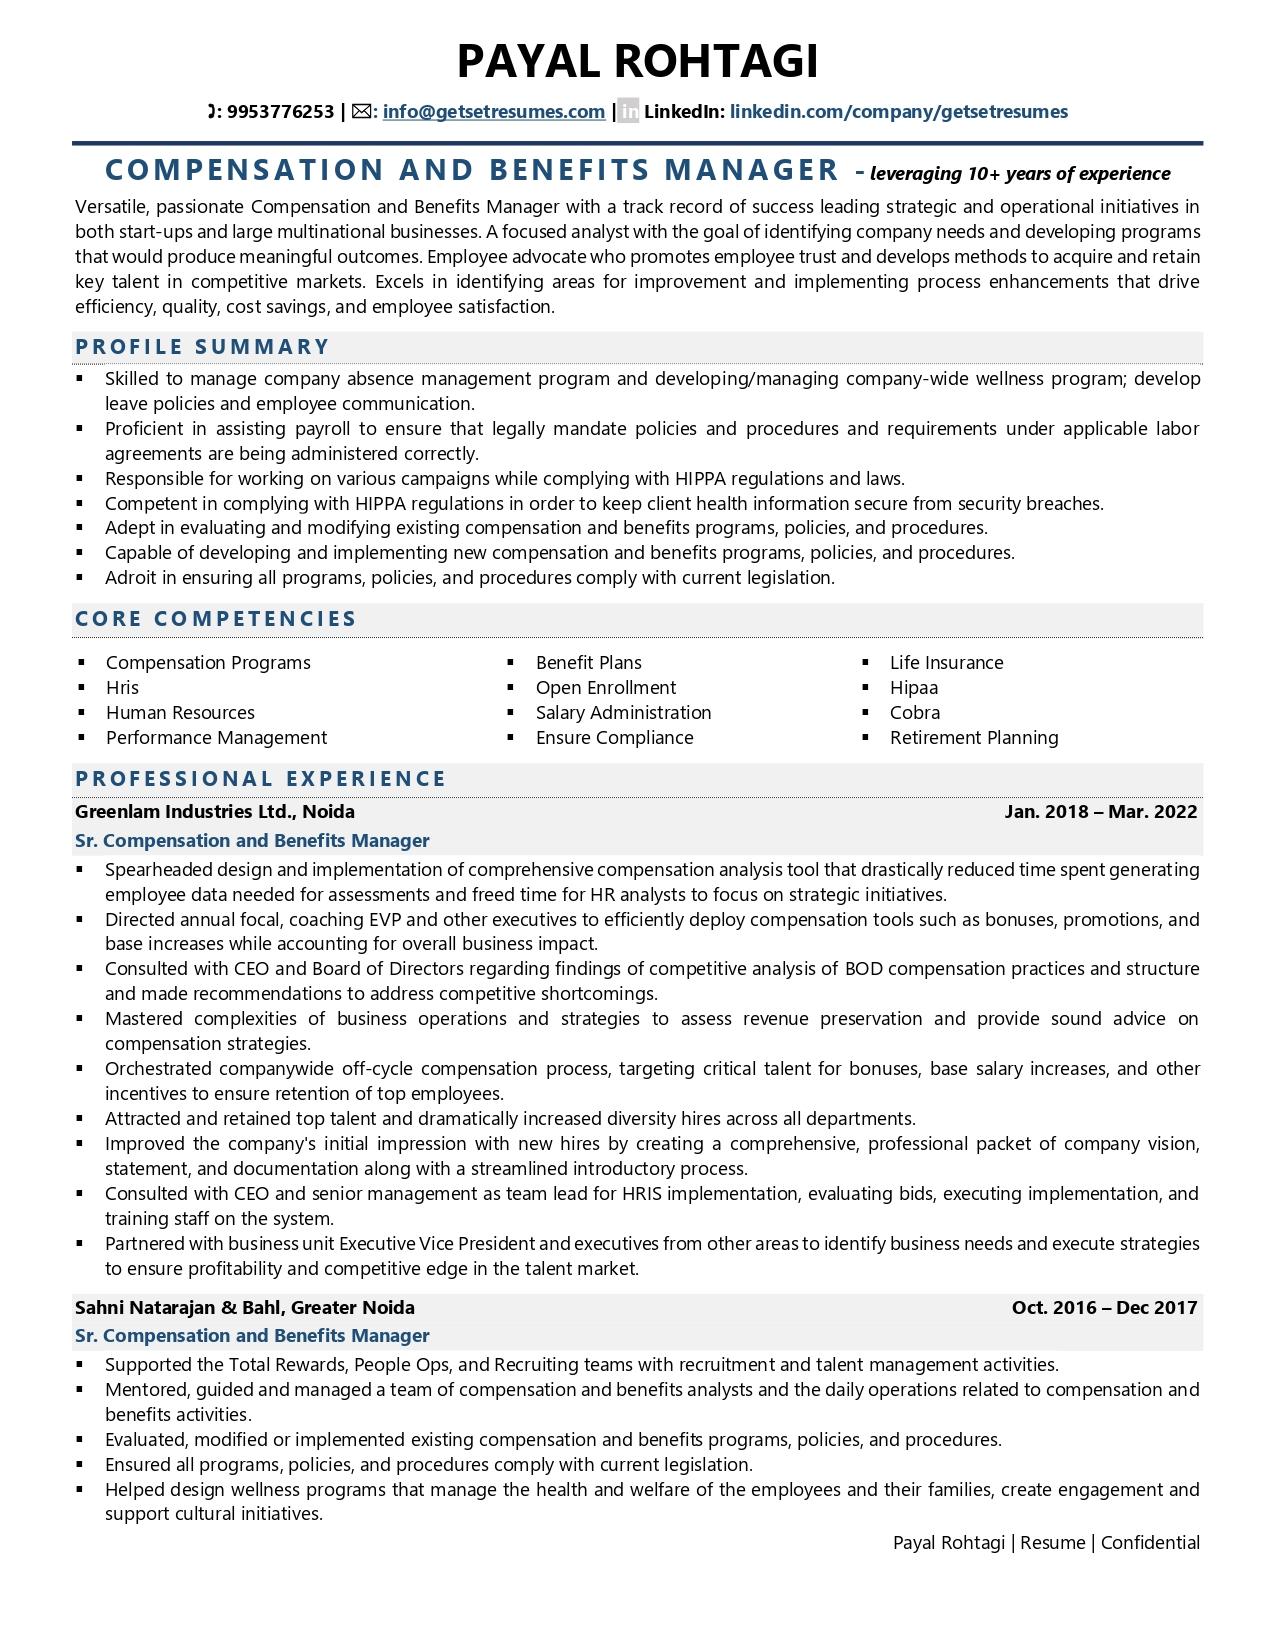 Compensation & Benefits Manager - Resume Example & Template